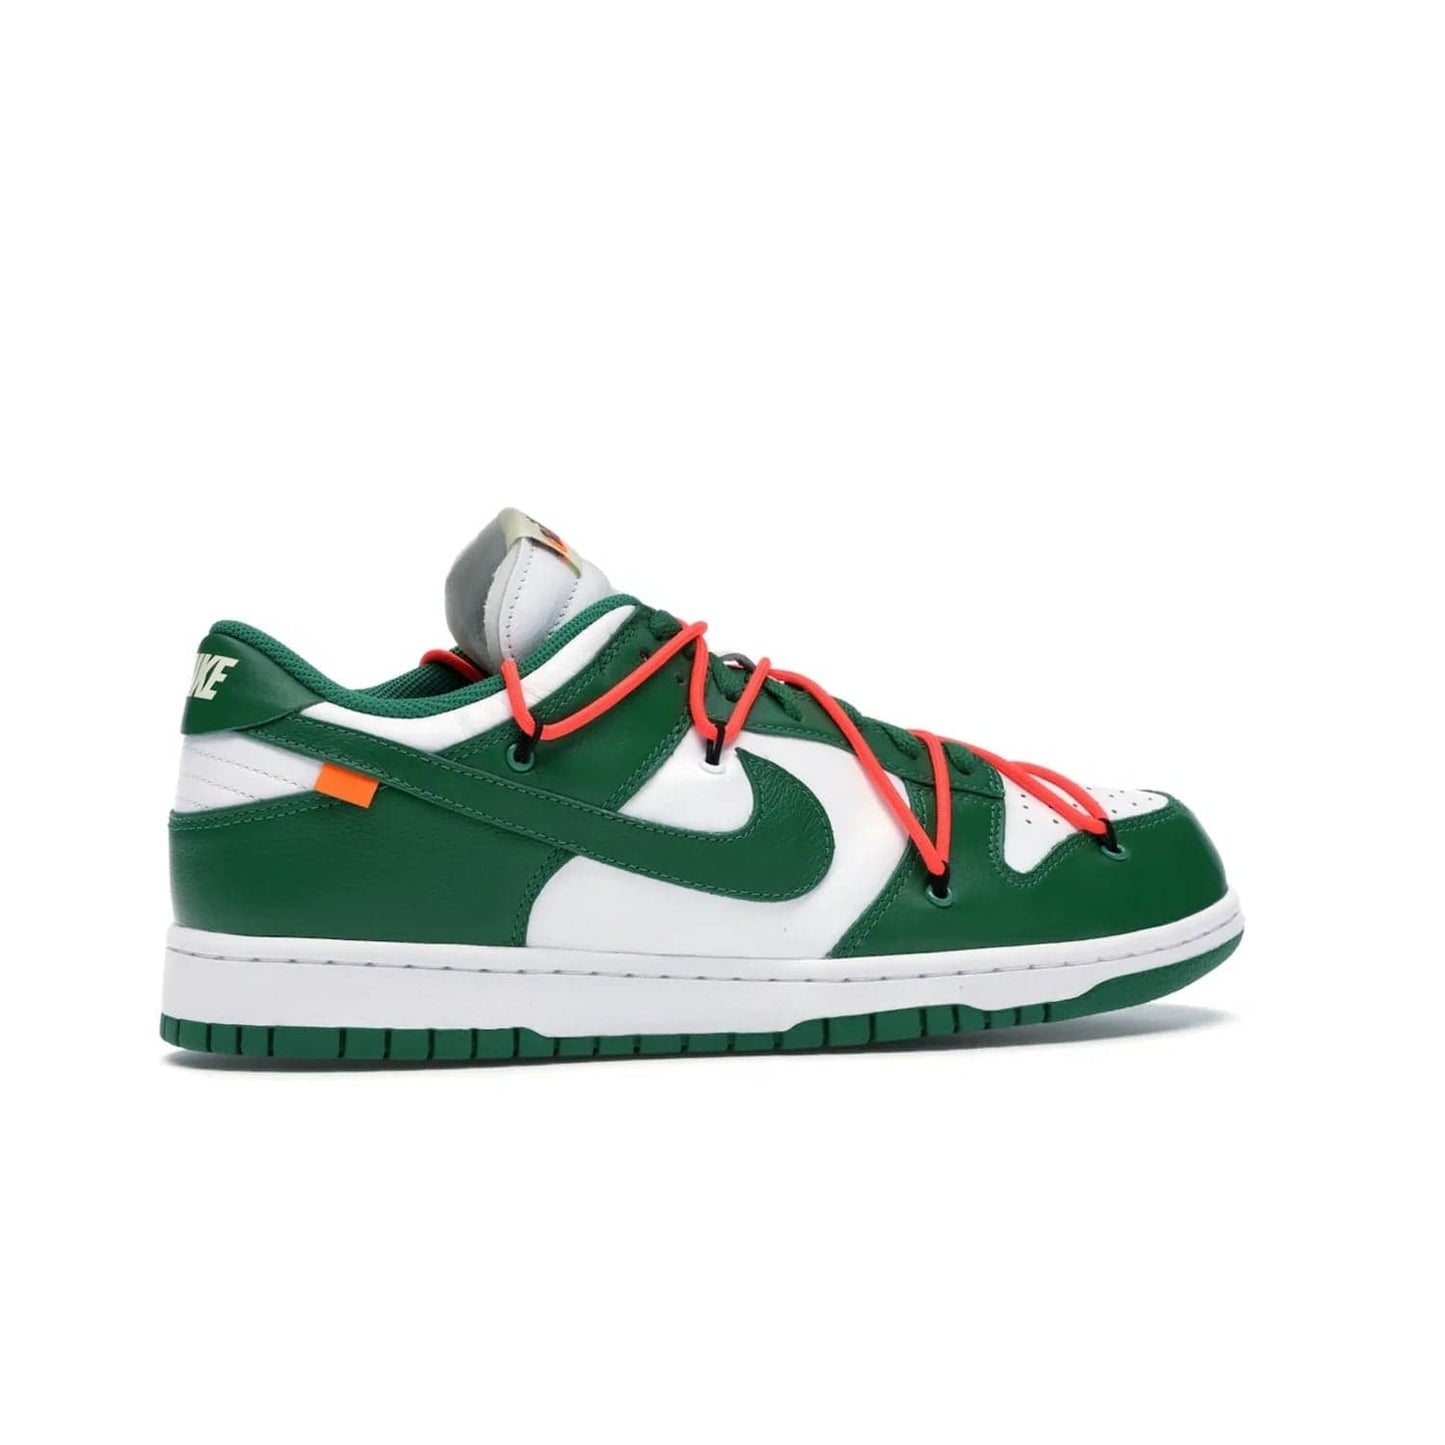 Nike Dunk Low Off-White Pine Green - Image 35 - Only at www.BallersClubKickz.com - The Nike Dunk Low Off-White Pine Green combines classic 1980s style with modern-day design. Featuring white leather uppers and pine green overlays, these classic kicks feature secondary lacing system, zip-ties and signature Off-White text. Releasing in December 2019, these shoes are a timeless classic for any wardrobe.